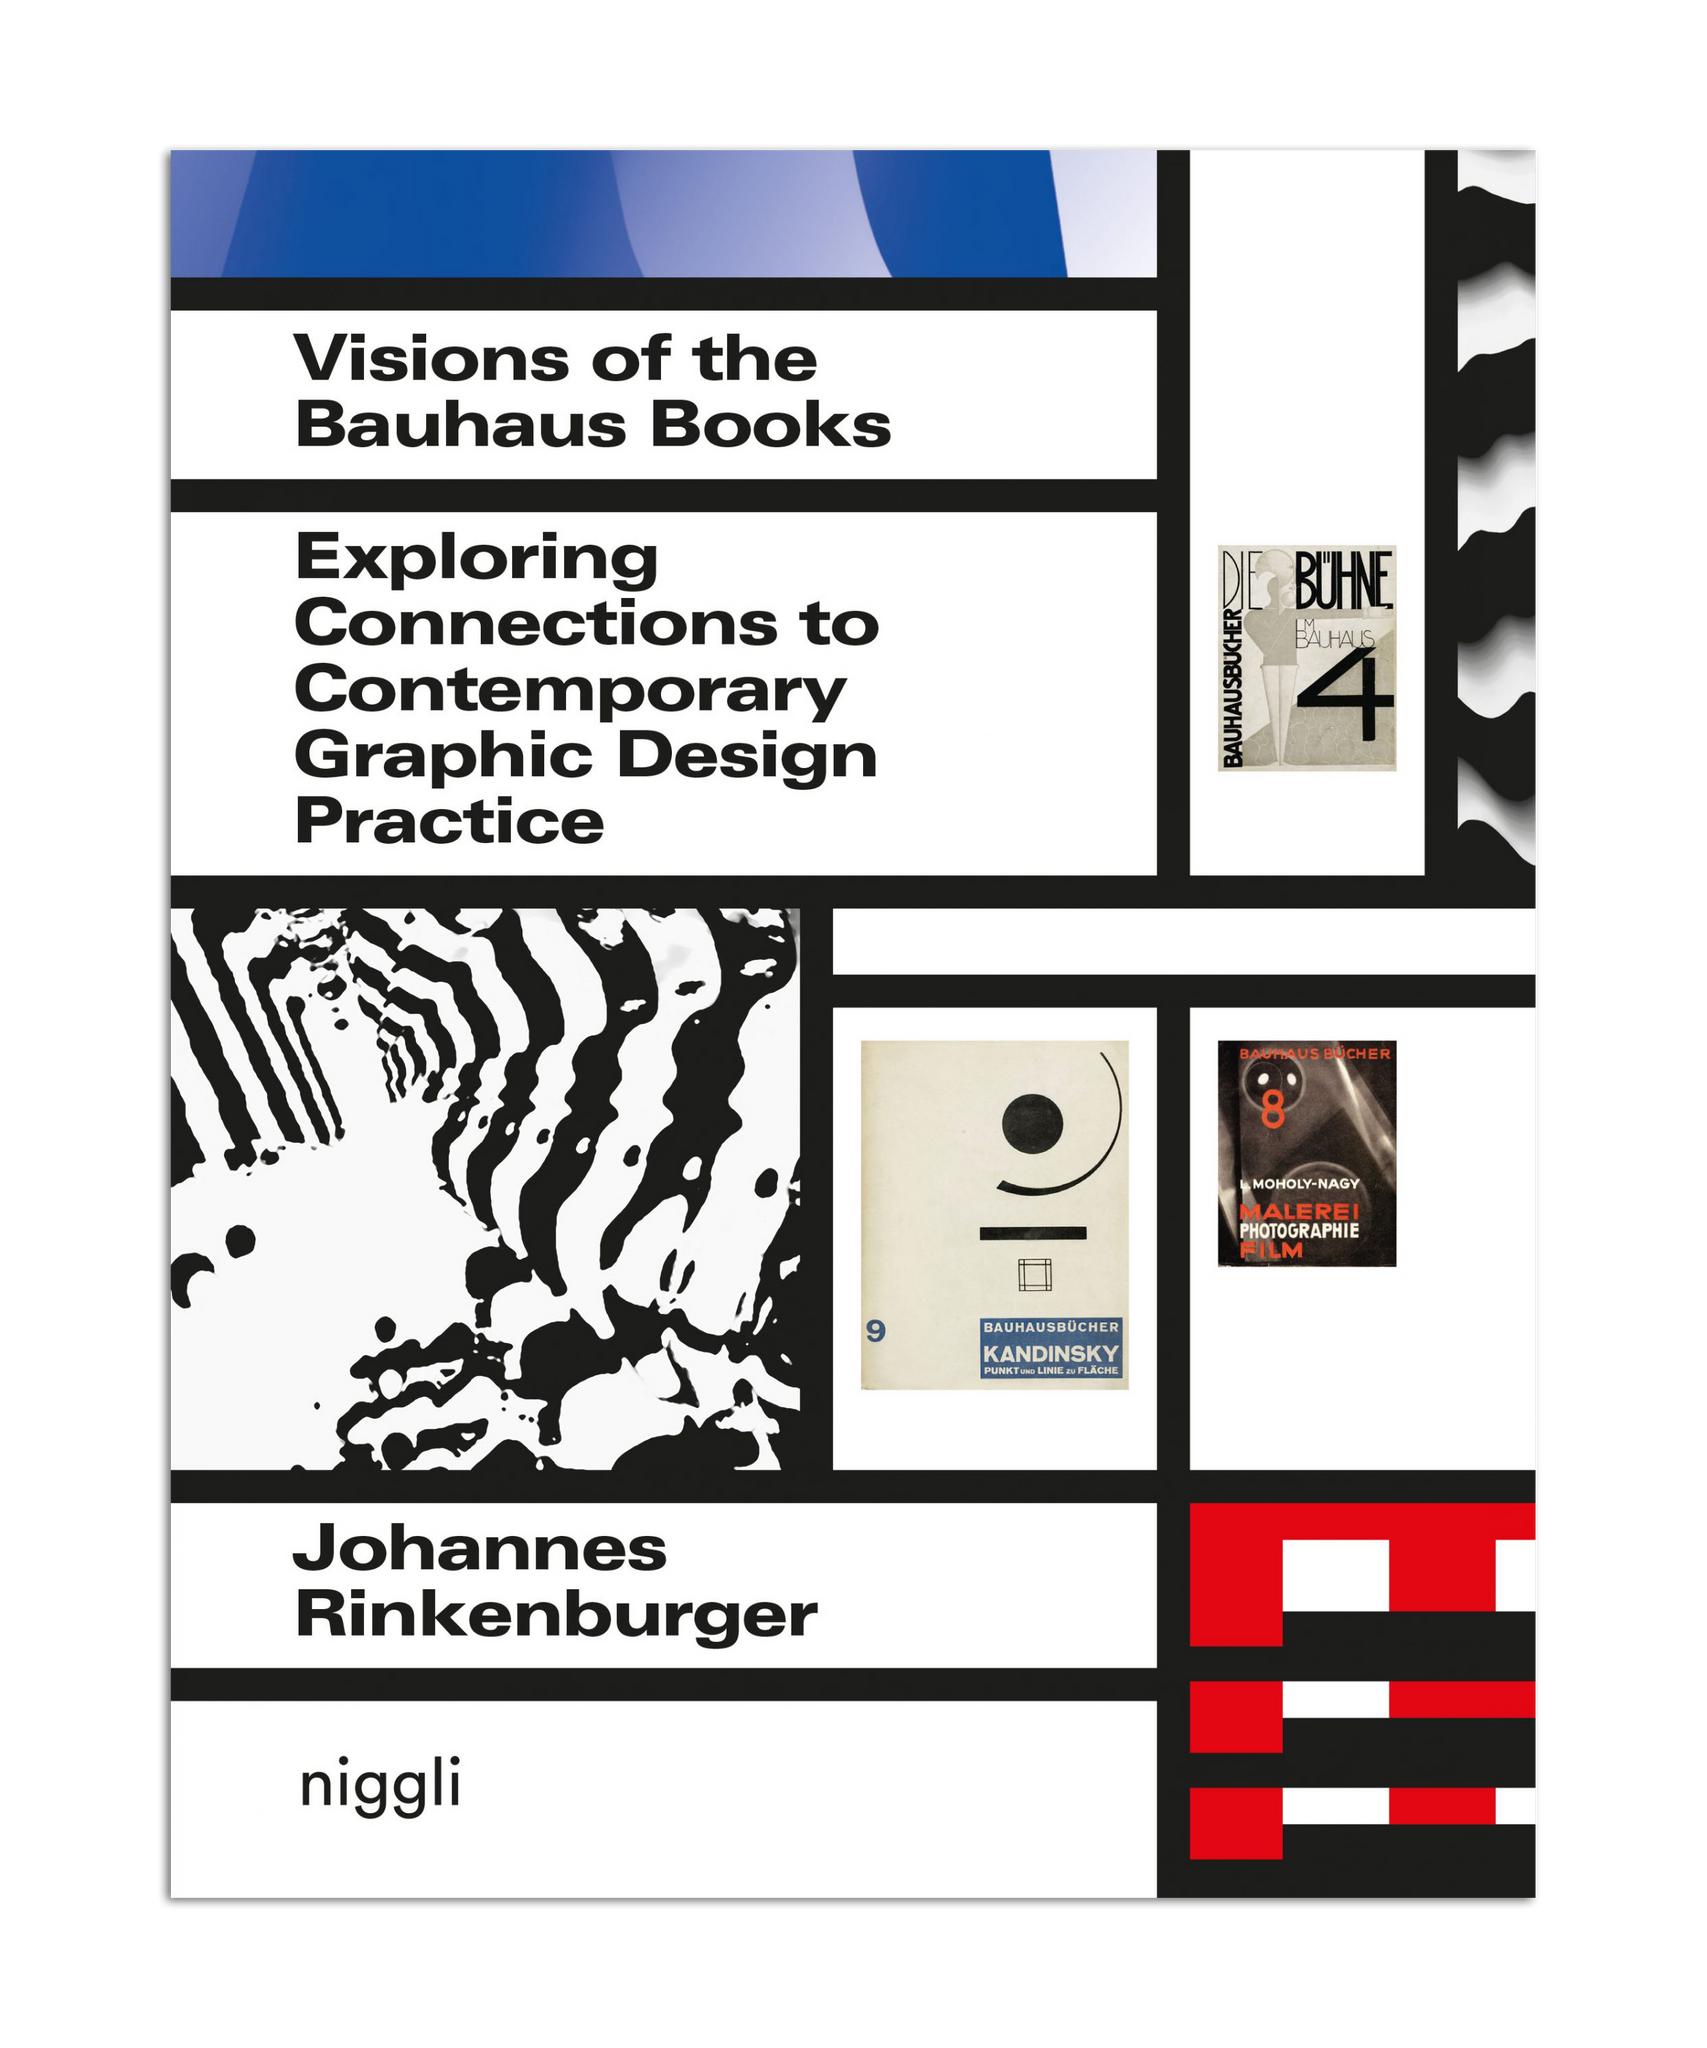 Visions of the Bauhaus Books: Exploring Connections to Contemporary Graphic Design Practice (NIGGLI EDITIONS)